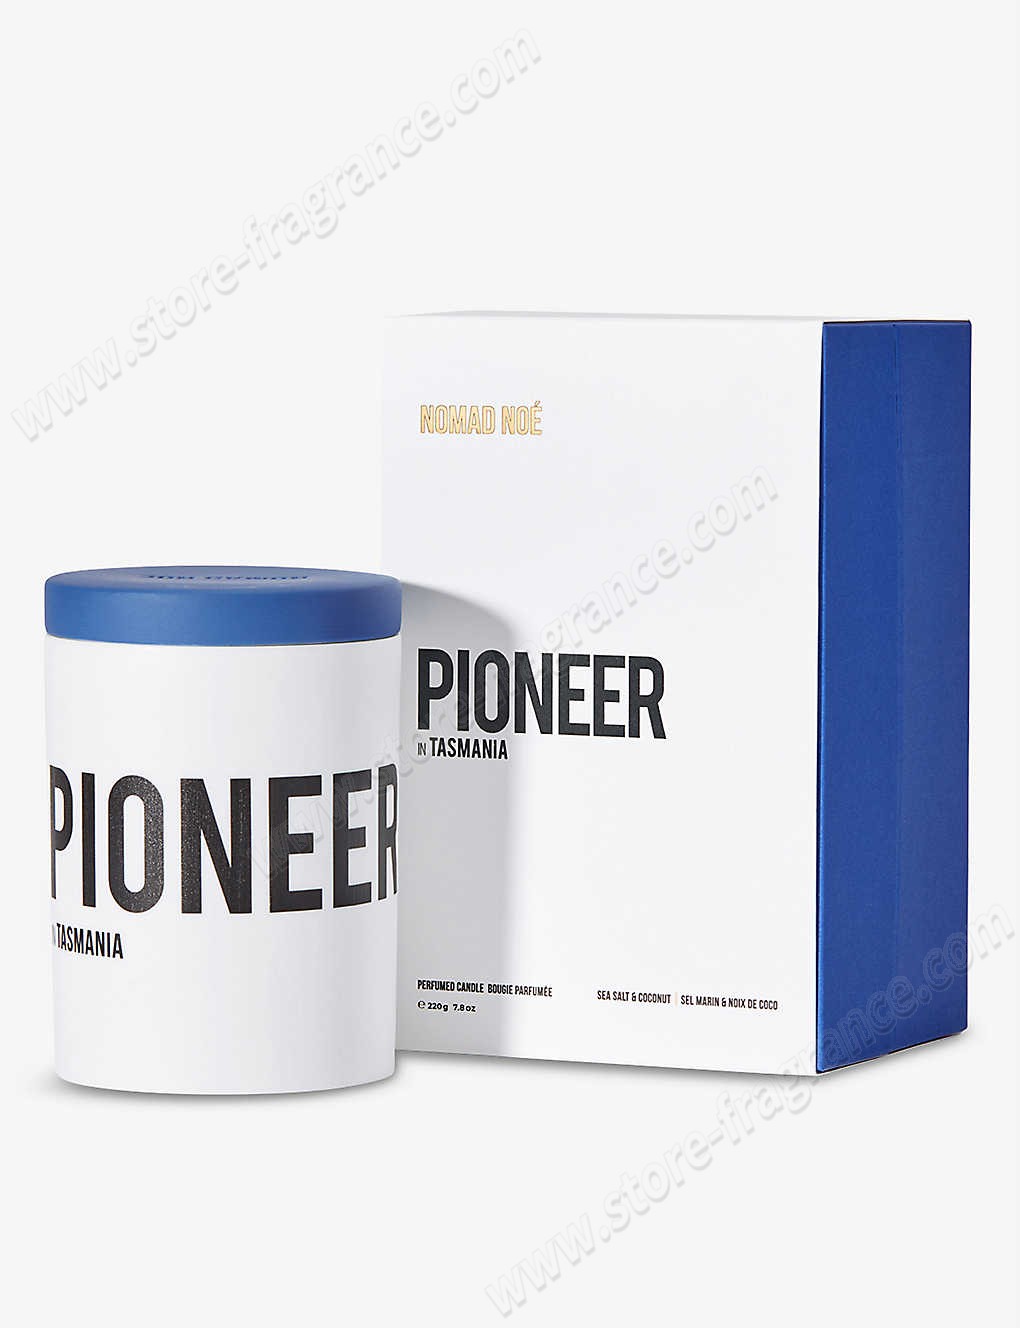 NOMAD NOE/Pioneer in Tasmania scented candle 220g ✿ Discount Store - -0